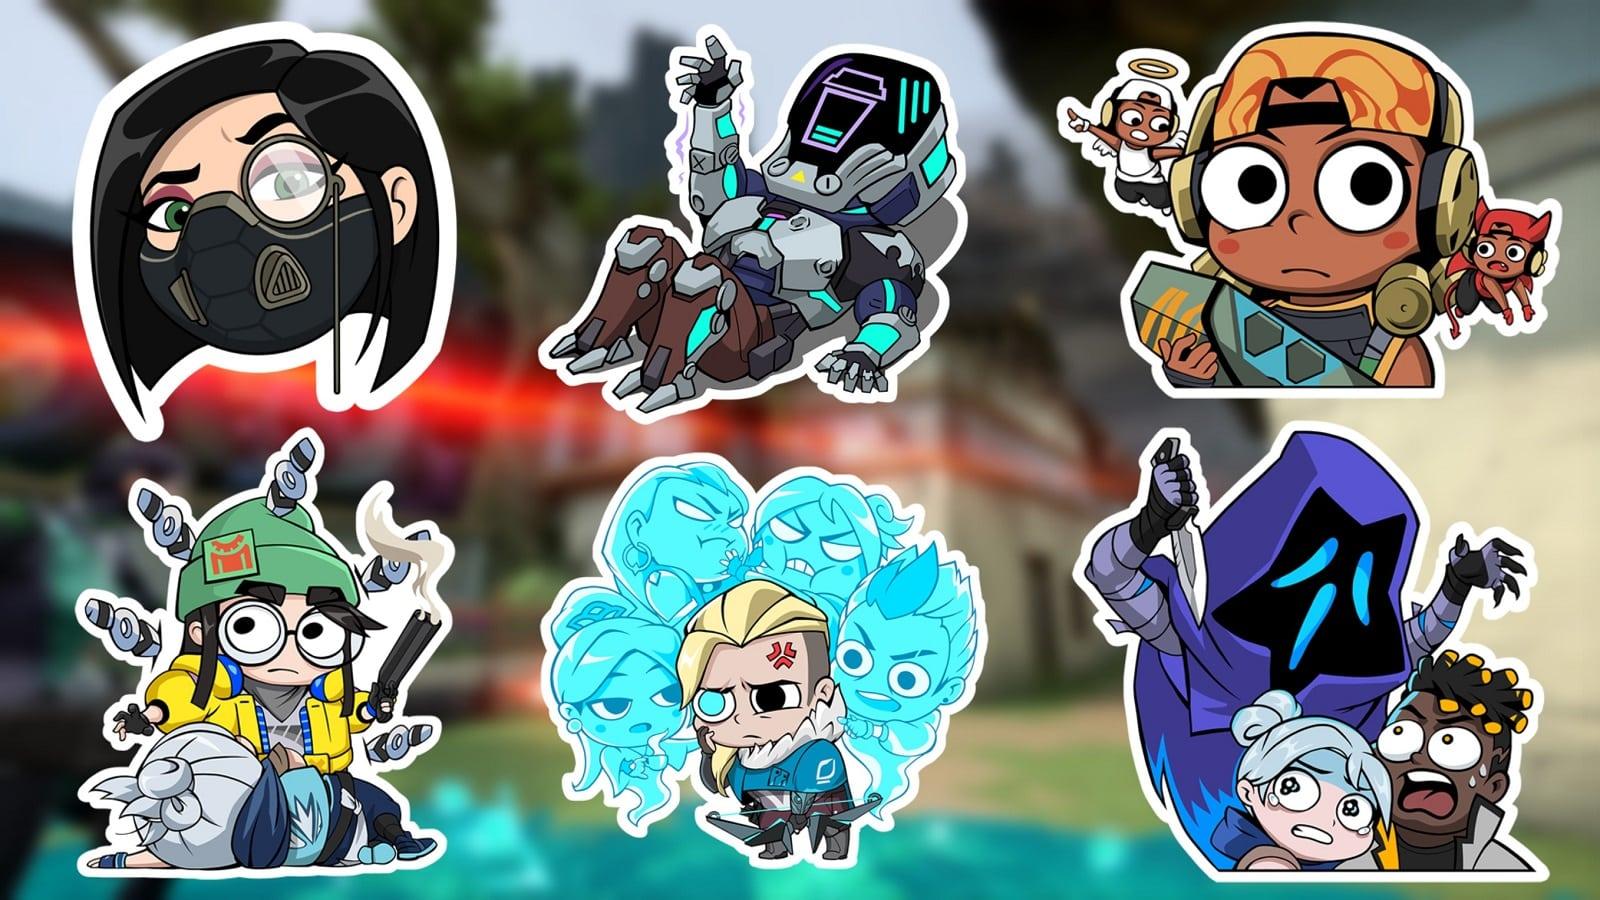 Valorant Episode 4 Act 3 in-game sprays available in the battle pass